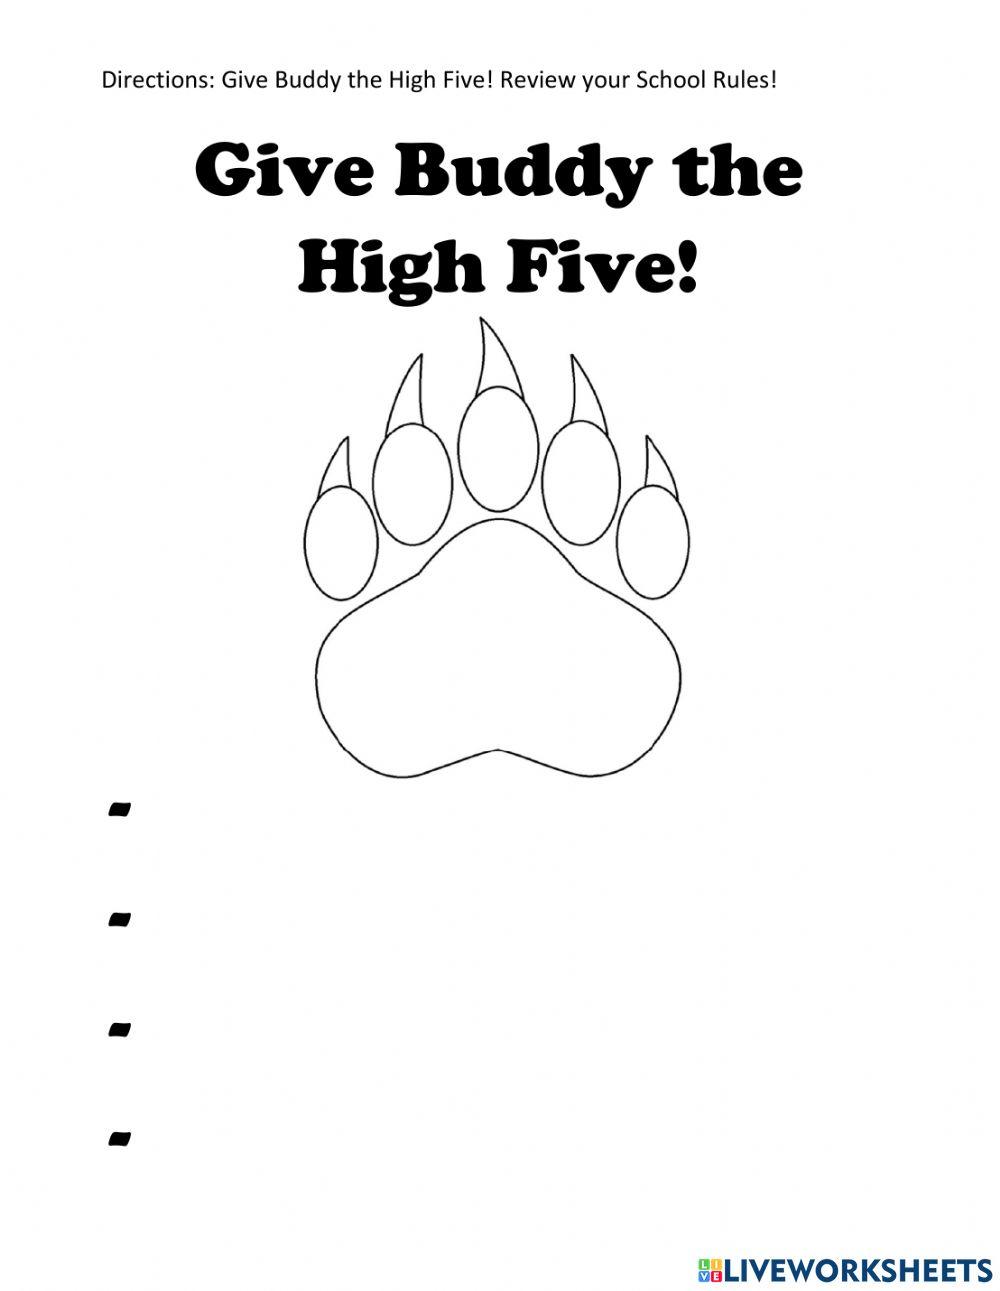 Give Buddy the High Five!